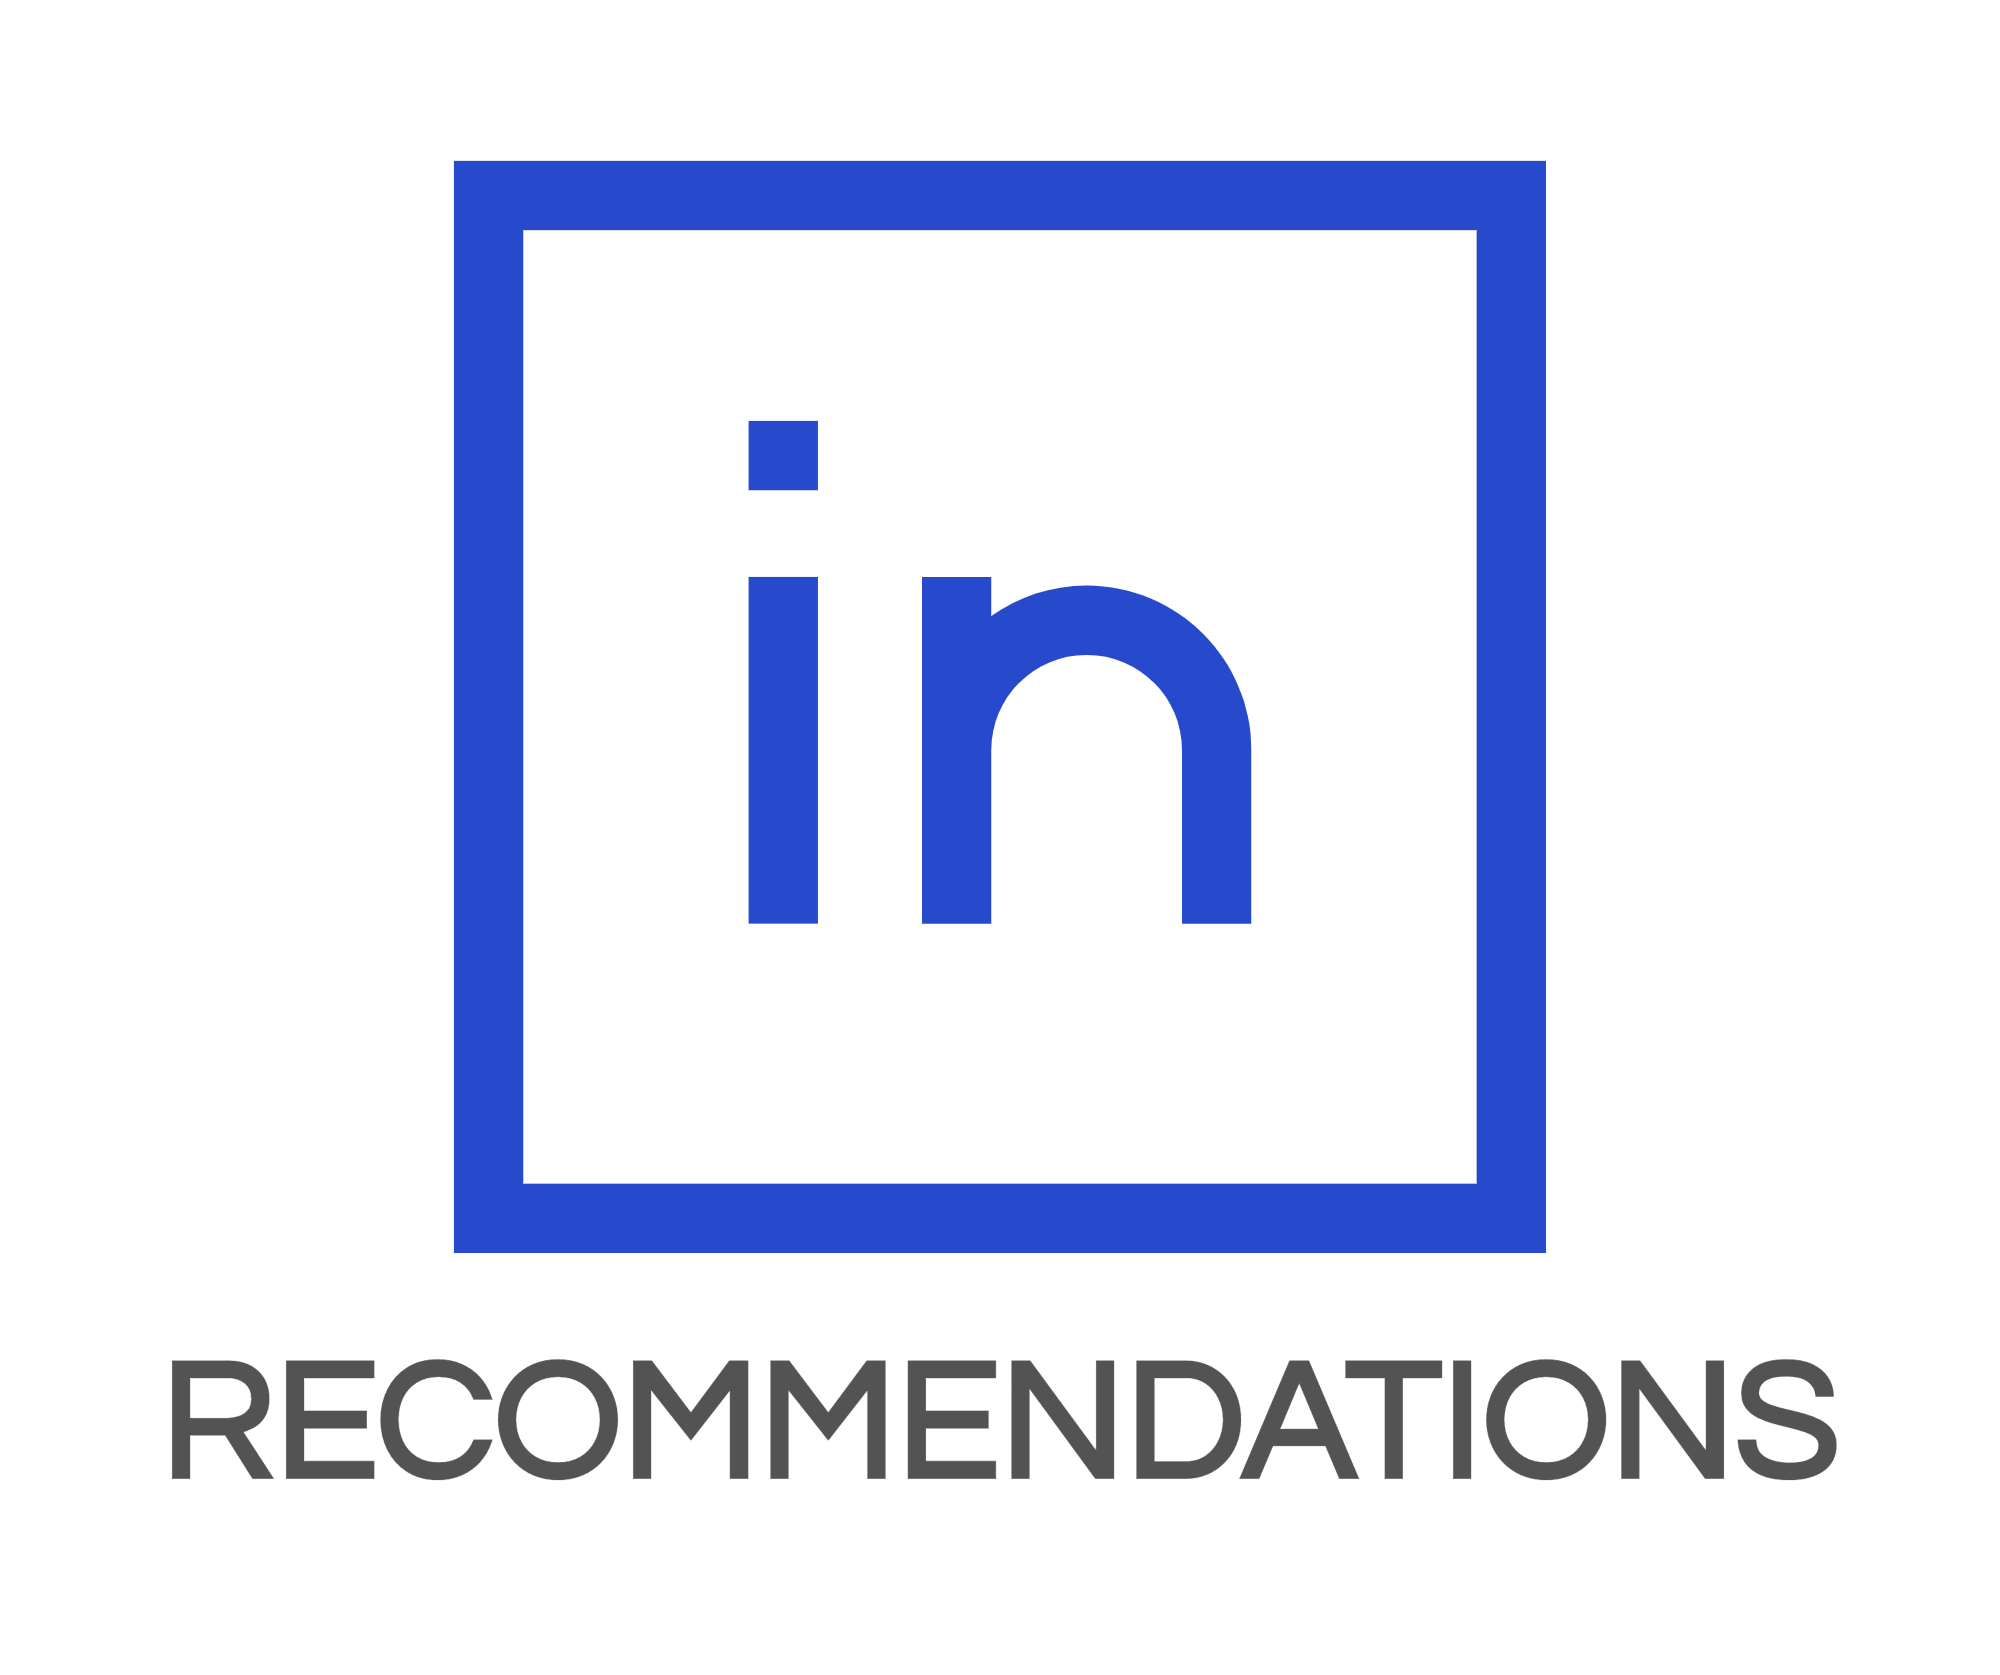 RECOMMENDATIONS-logo (2).png